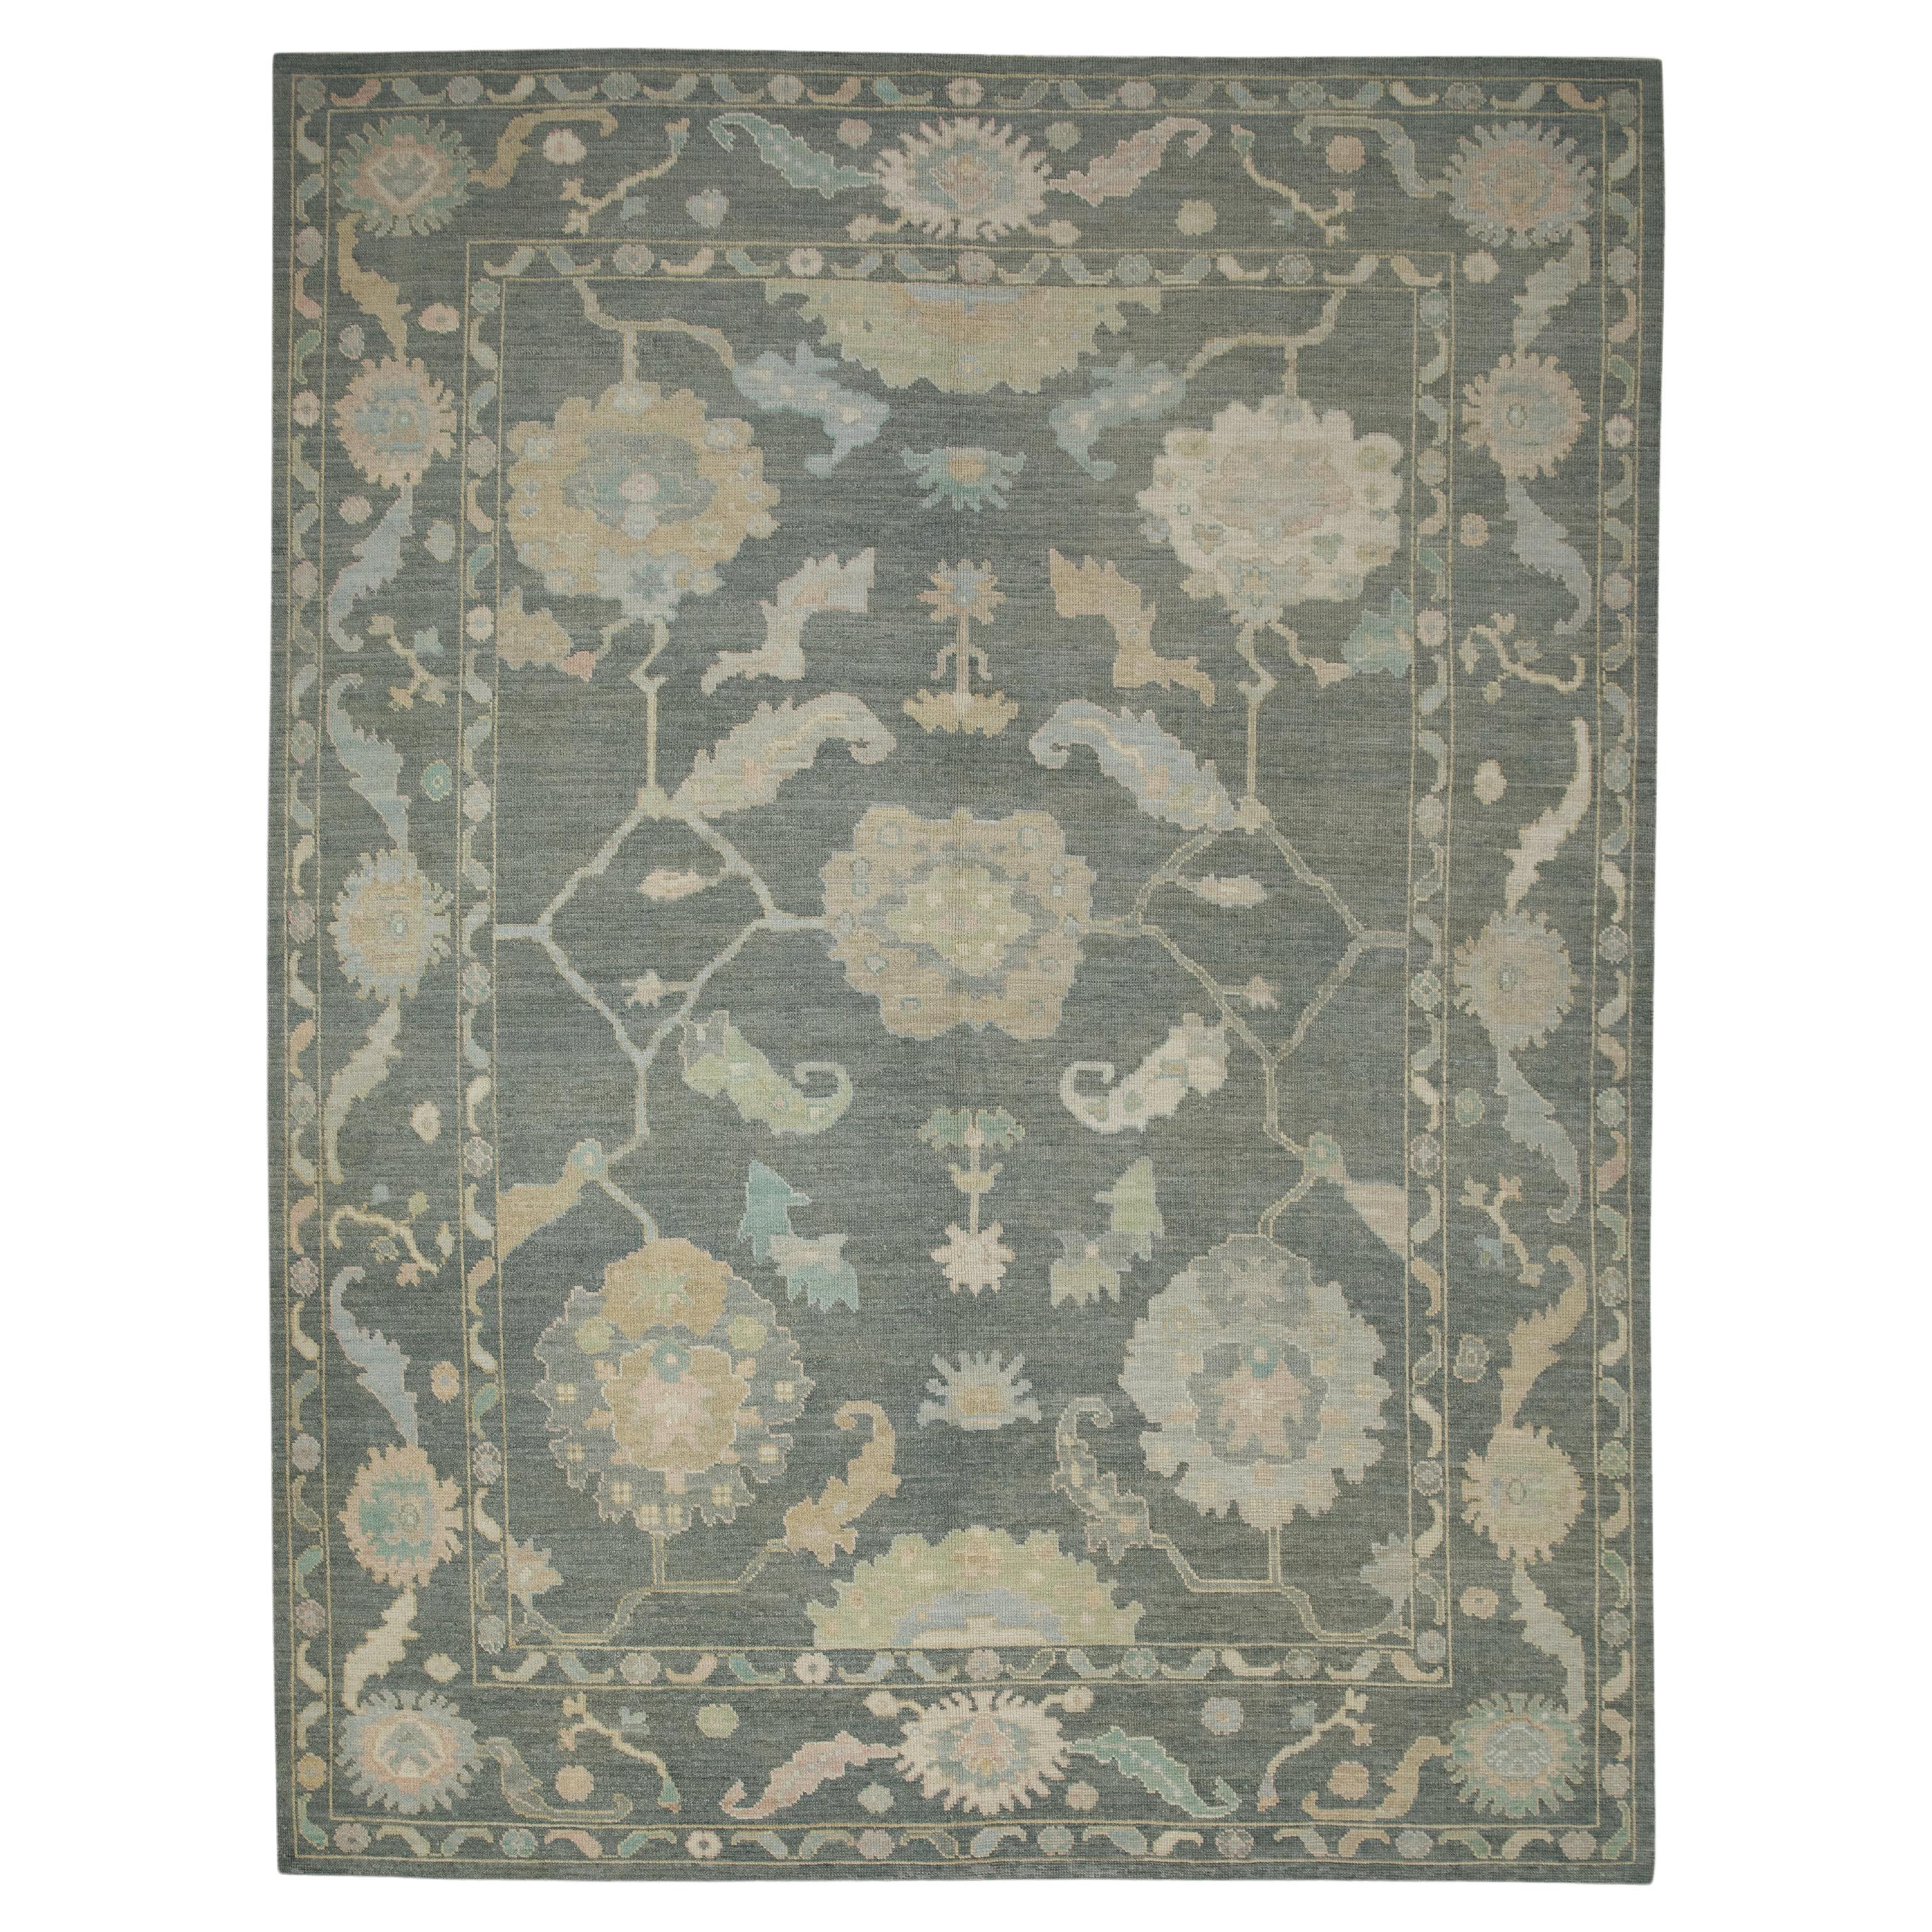 Gray Floral Design Handwoven Wool Turkish Oushak Rug 8' x 10'6" For Sale